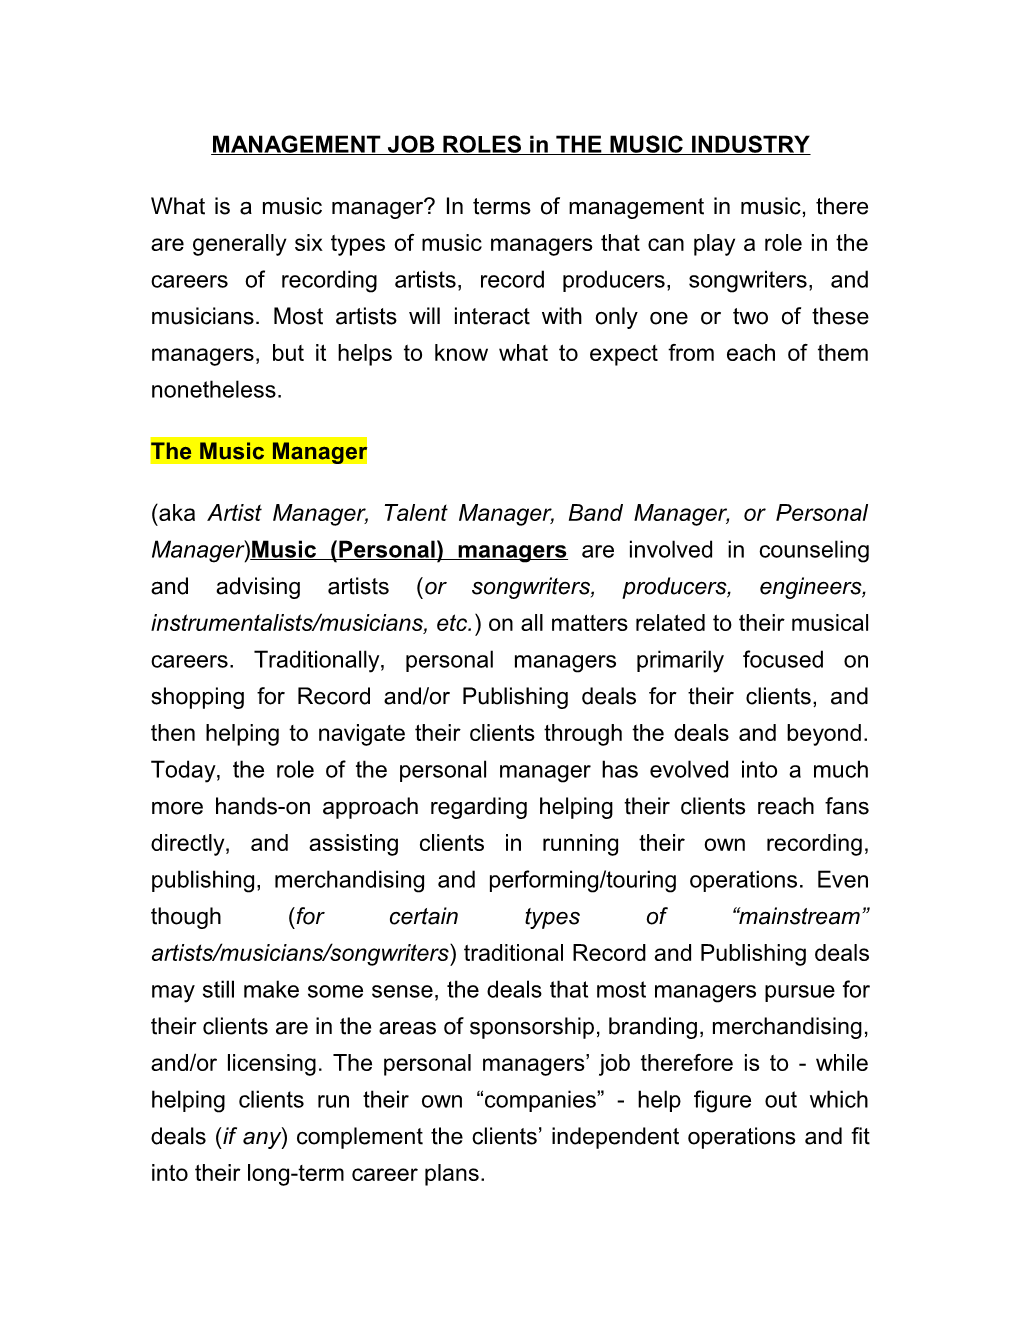 Management in Music and Management Roles